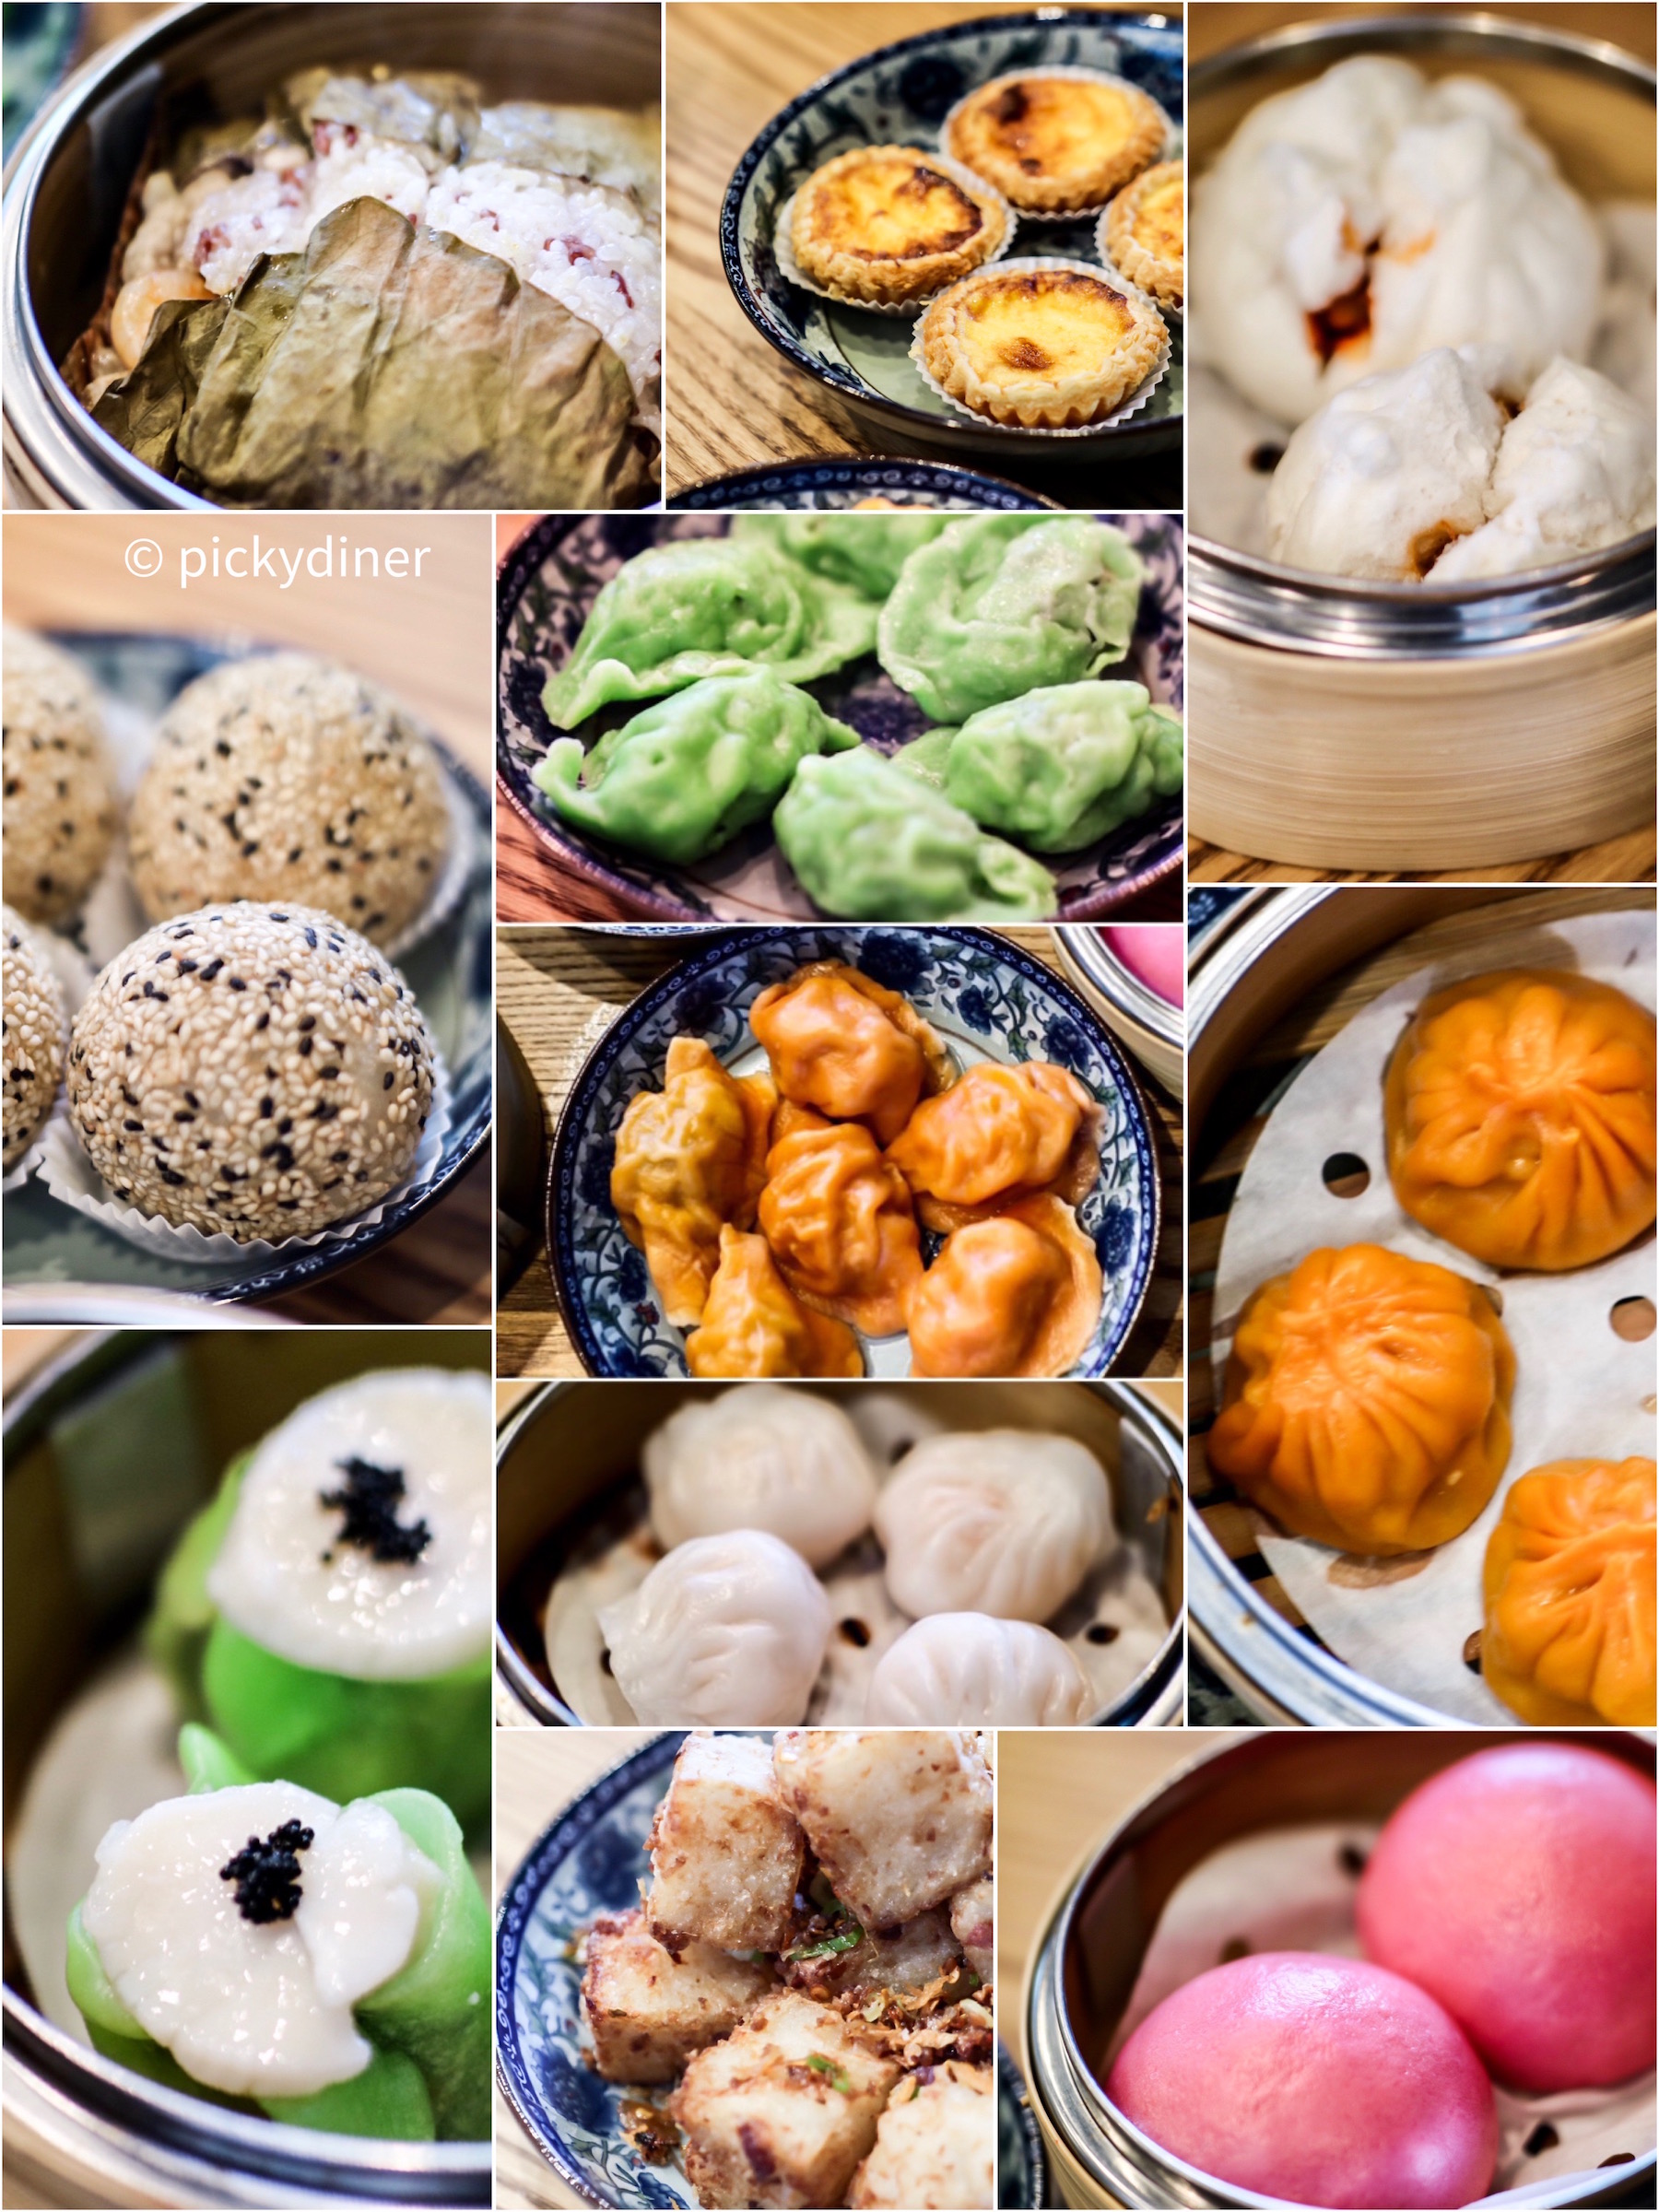 dim sum dishes at Heritage Asian Eatery